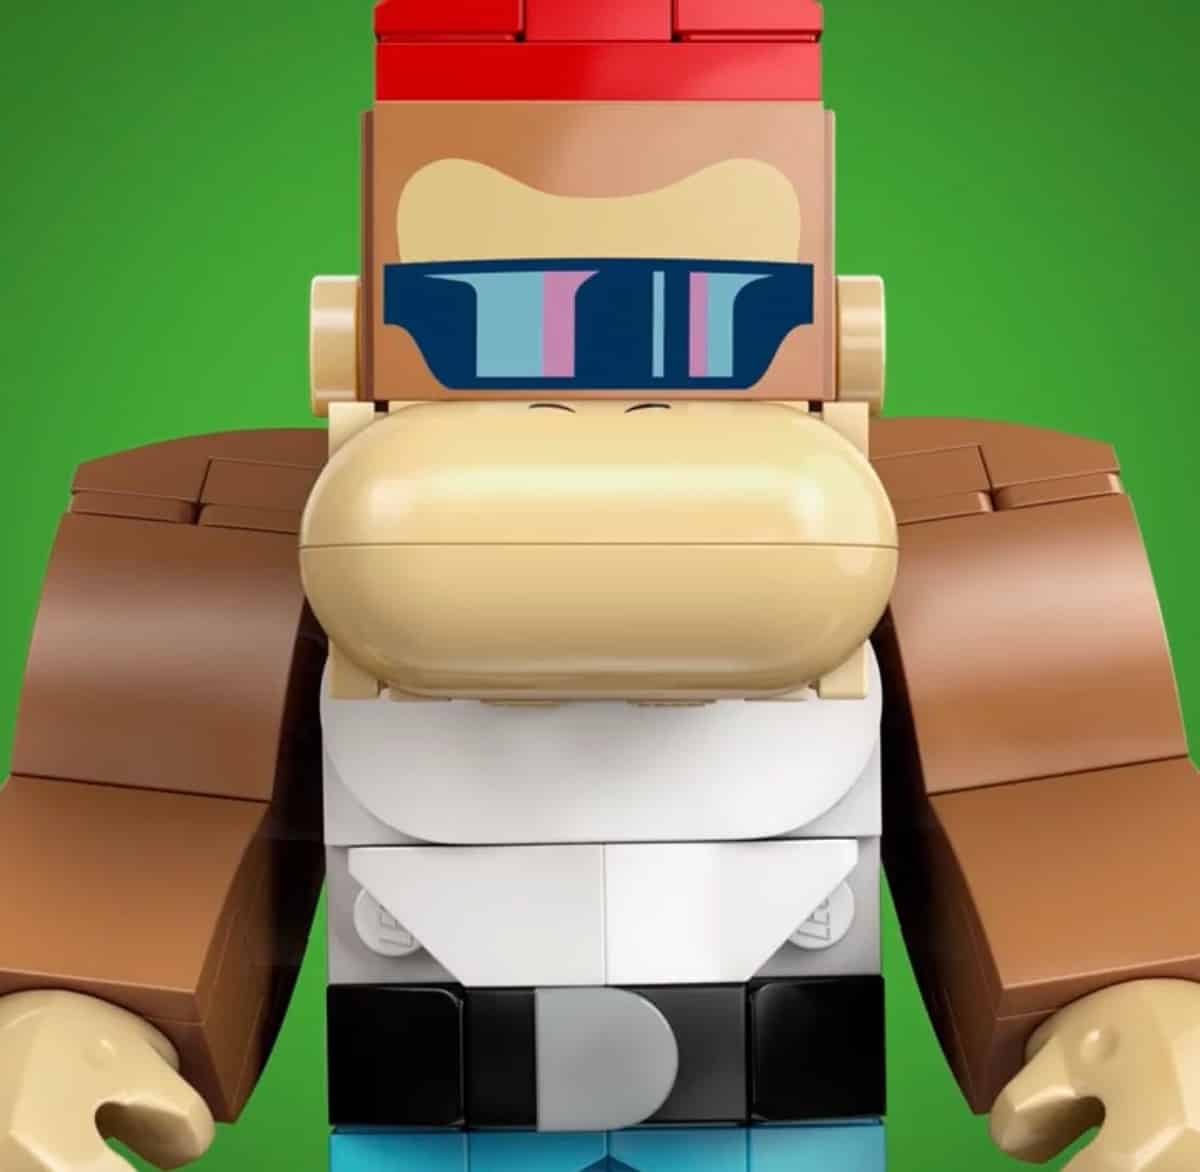 Donkey Kong will join the Lego Super Mario range this August